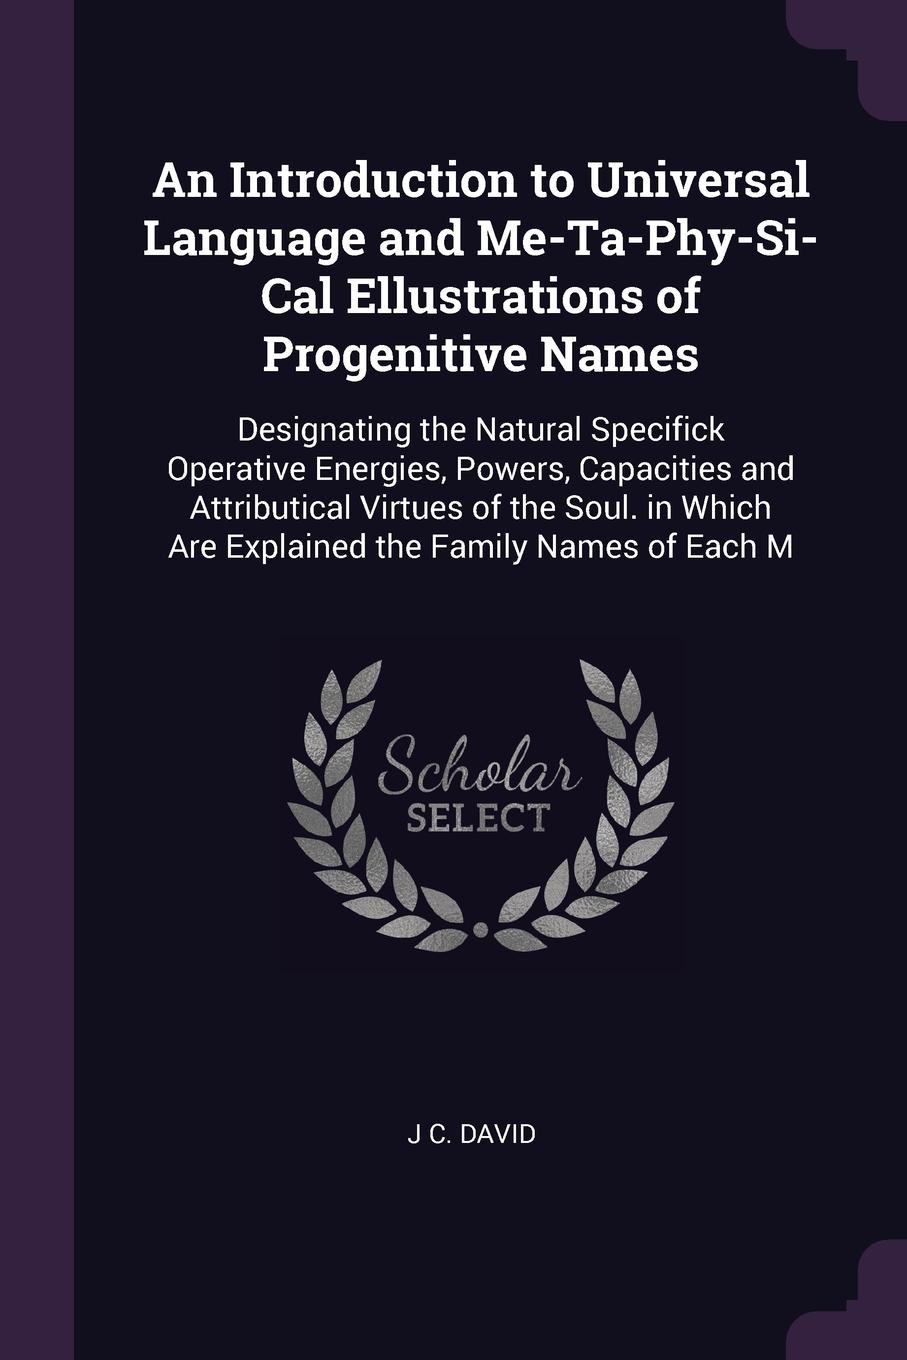 An Introduction to Universal Language and Me-Ta-Phy-Si-Cal Ellustrations of Progenitive Names. Designating the Natural Specifick Operative Energies, Powers, Capacities and Attributical Virtues of the Soul. in Which Are Explained the Family Names o...